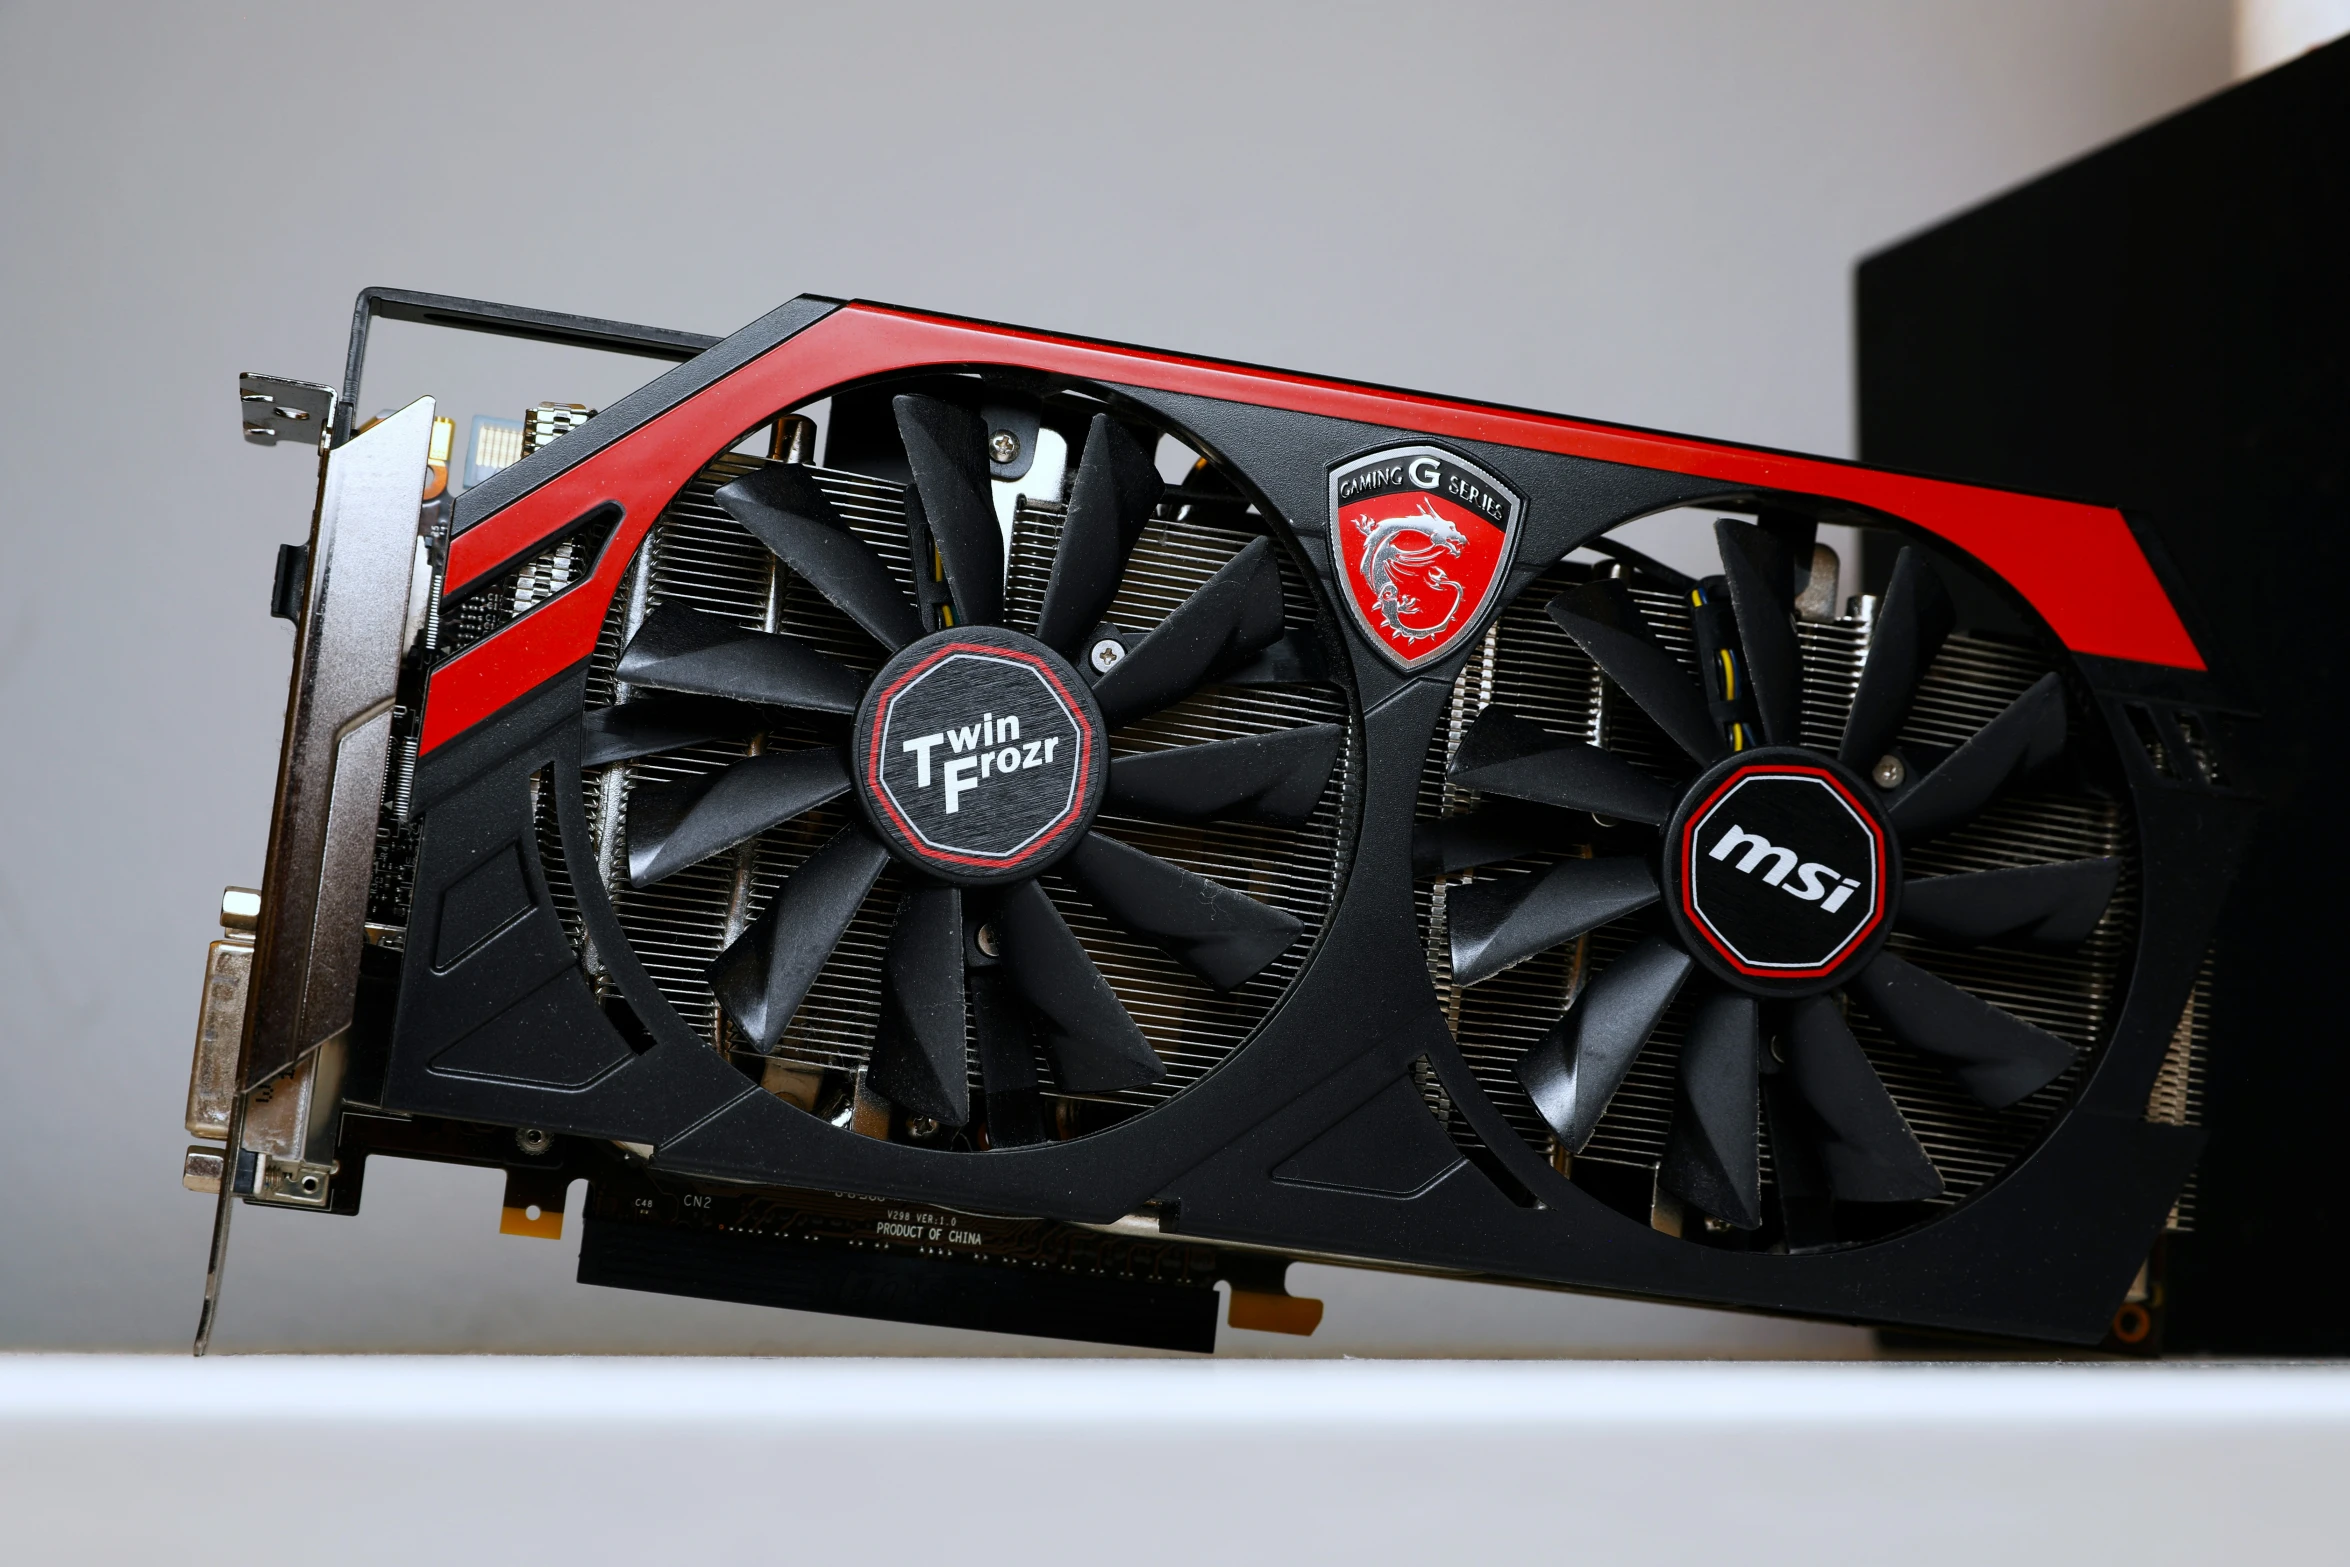 a red and black graphics card sits on top of the other